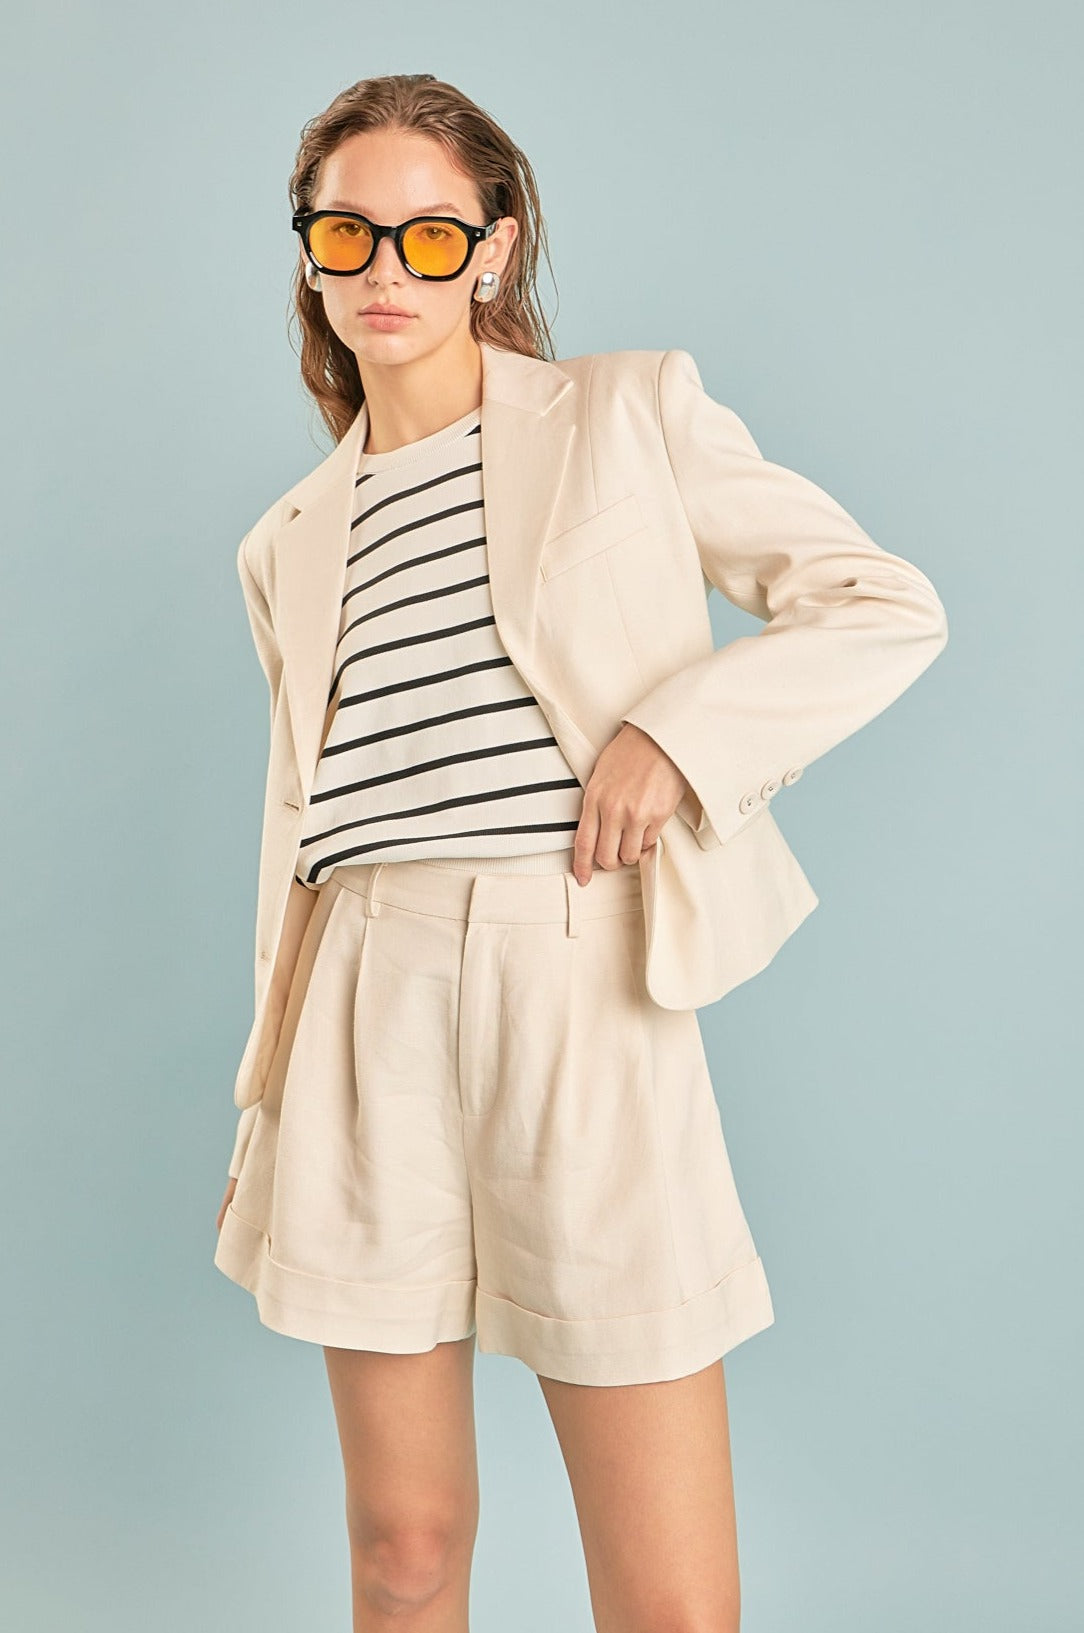 ENDLESS ROSE - Linen 3 Buttoned Blazer - BLAZERS available at Objectrare